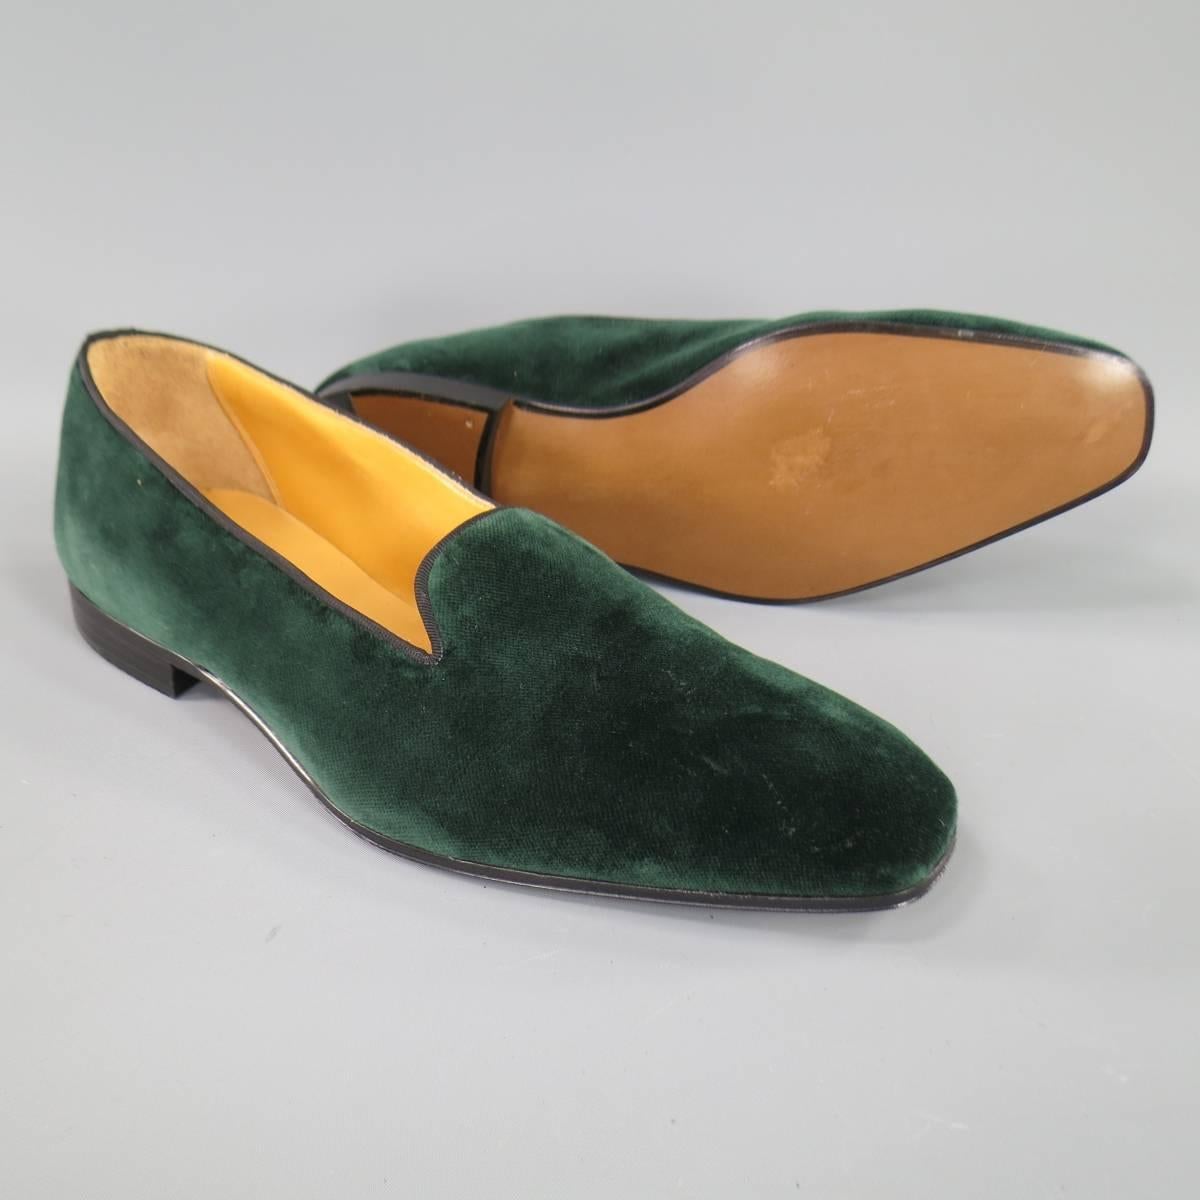 These classic chic tuxedo loafers by GAZIANO & GIRLING come in plush forest green velvet with tan leather lining, and black heel. Made in England.
 
New with Box.
Marked: 8 E
 
11.75 in X 4 in.